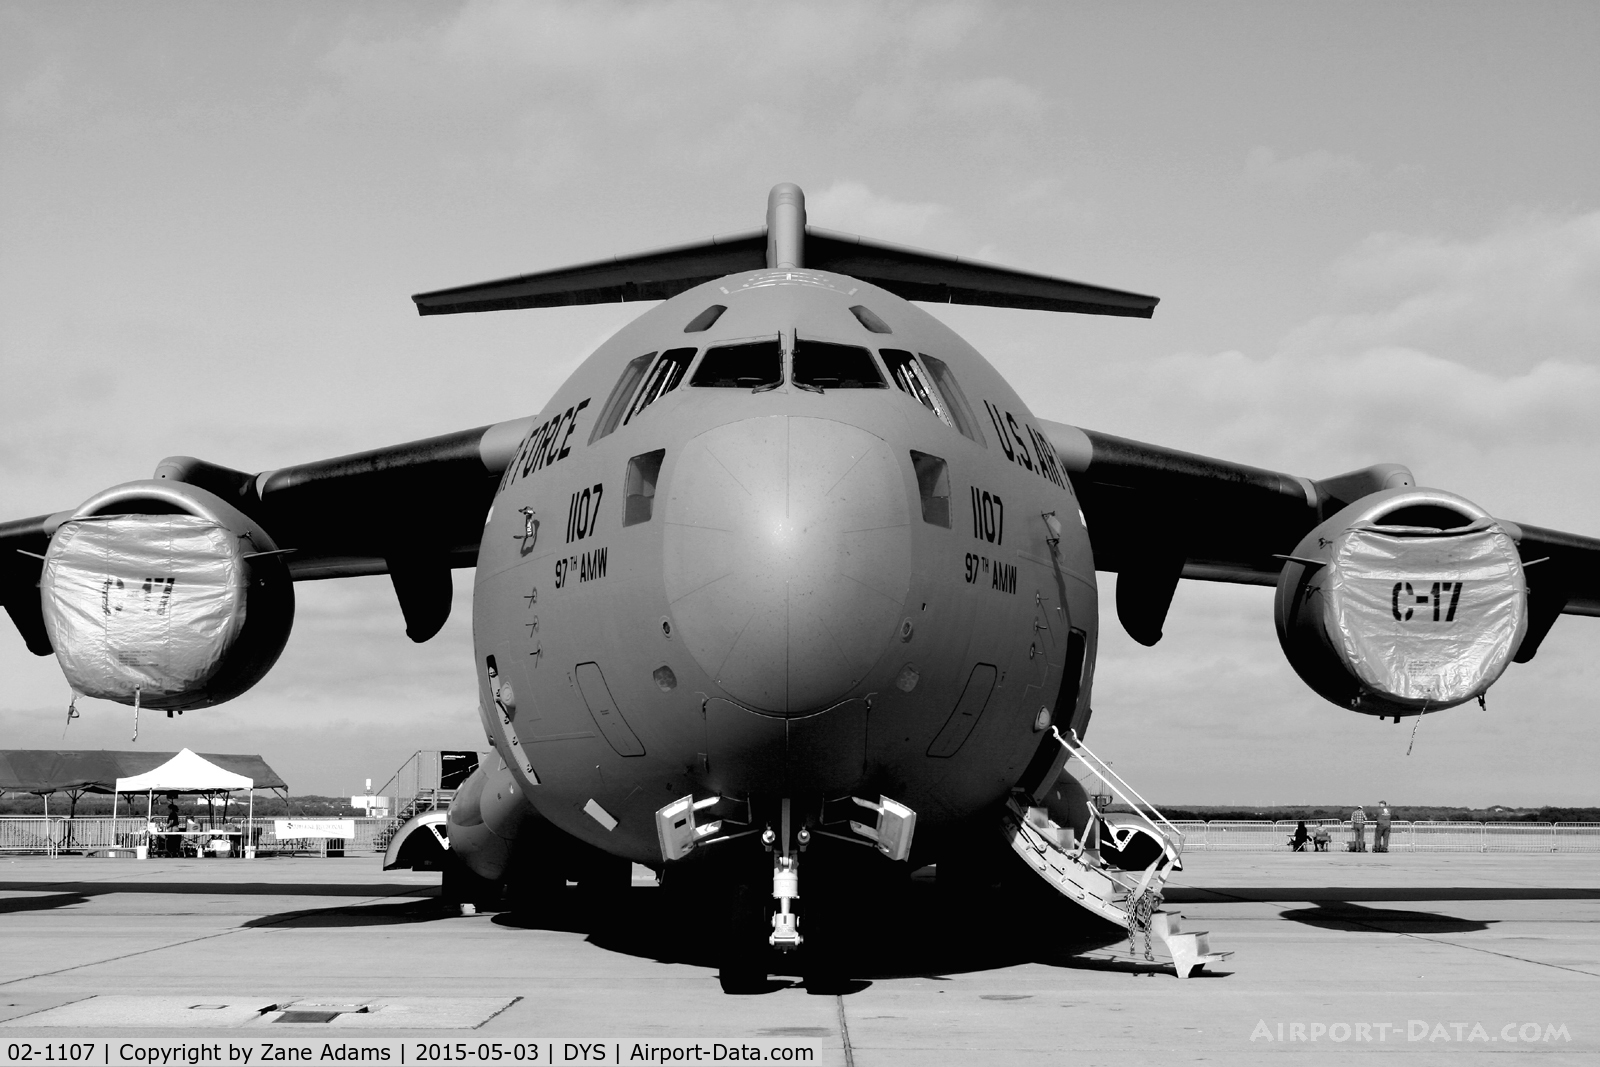 02-1107, 2002 Boeing C-17A Globemaster III C/N P-107, At the 2014 Big Country Airshow - Dyess AFB, TX